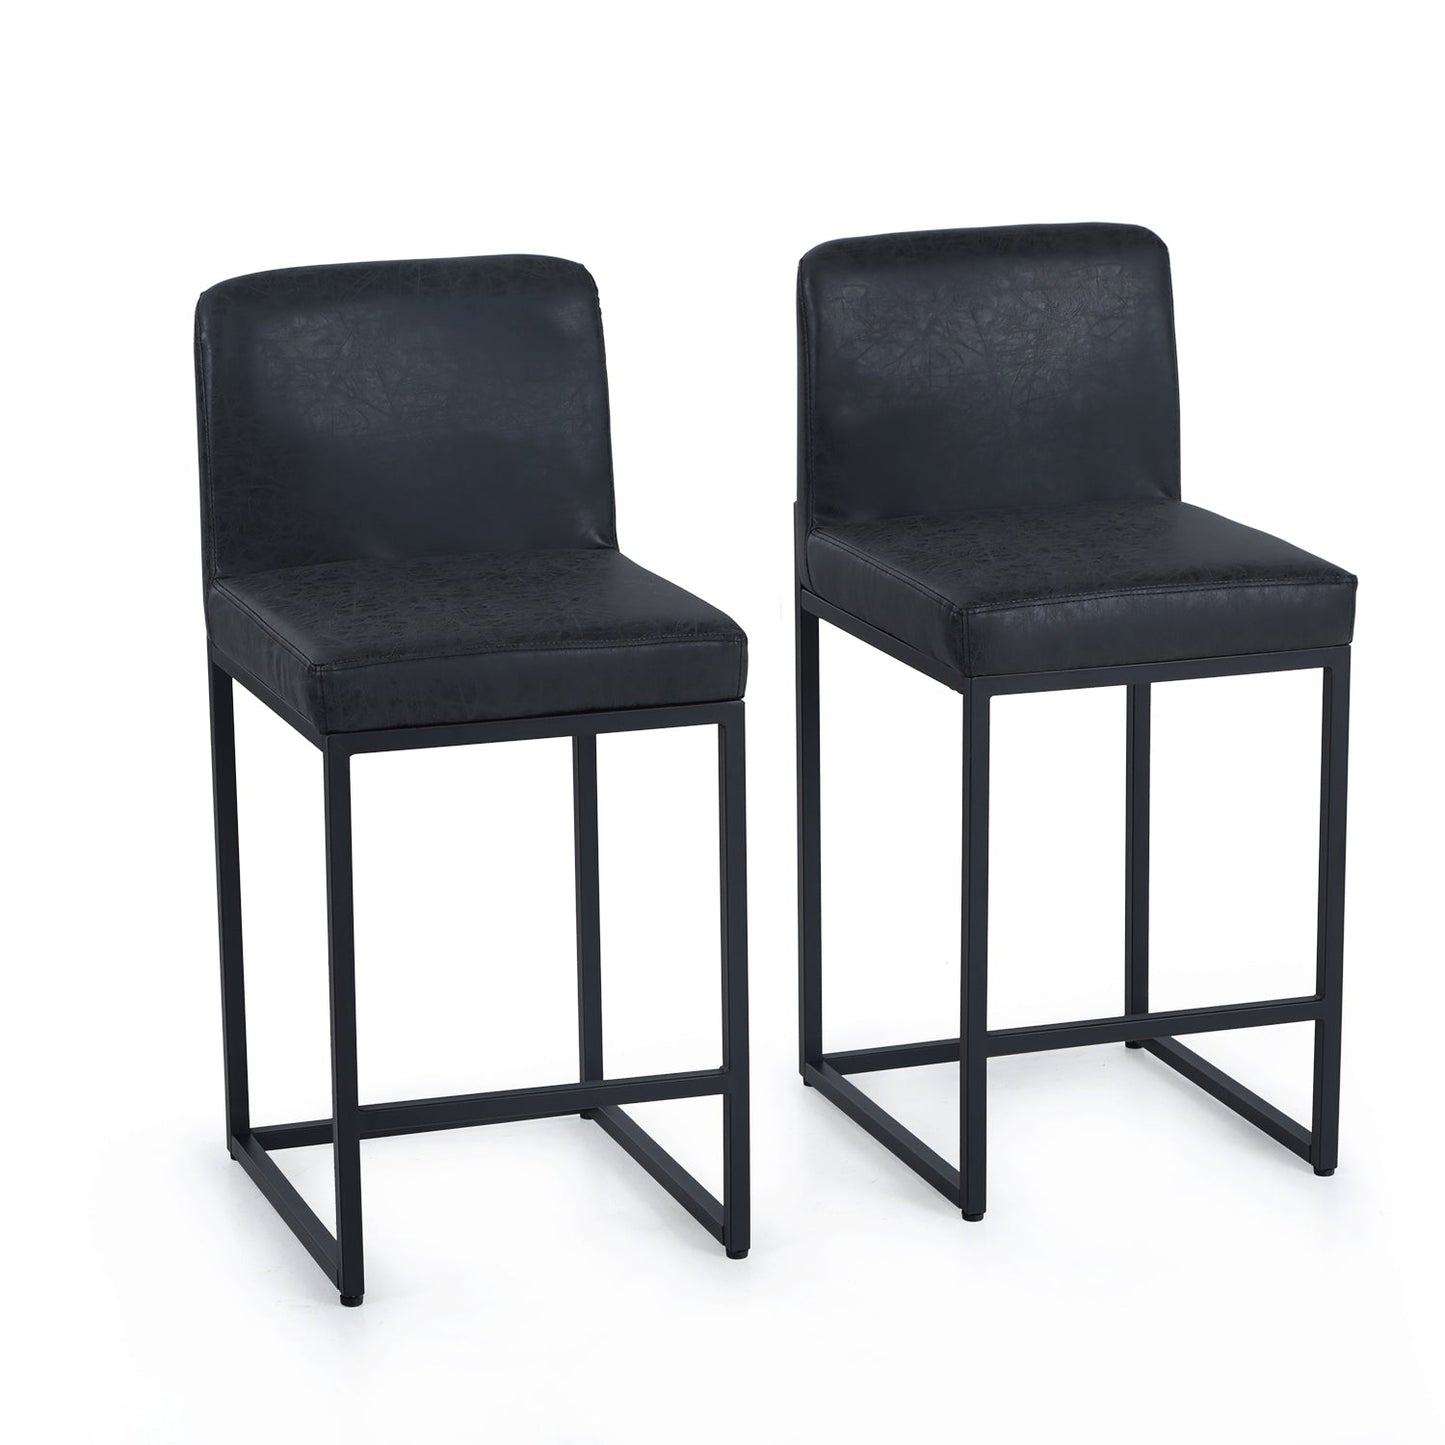 Sophia & William 24" PU Leather Counter Height Bar Stool with Backrest-Set of 2-Black